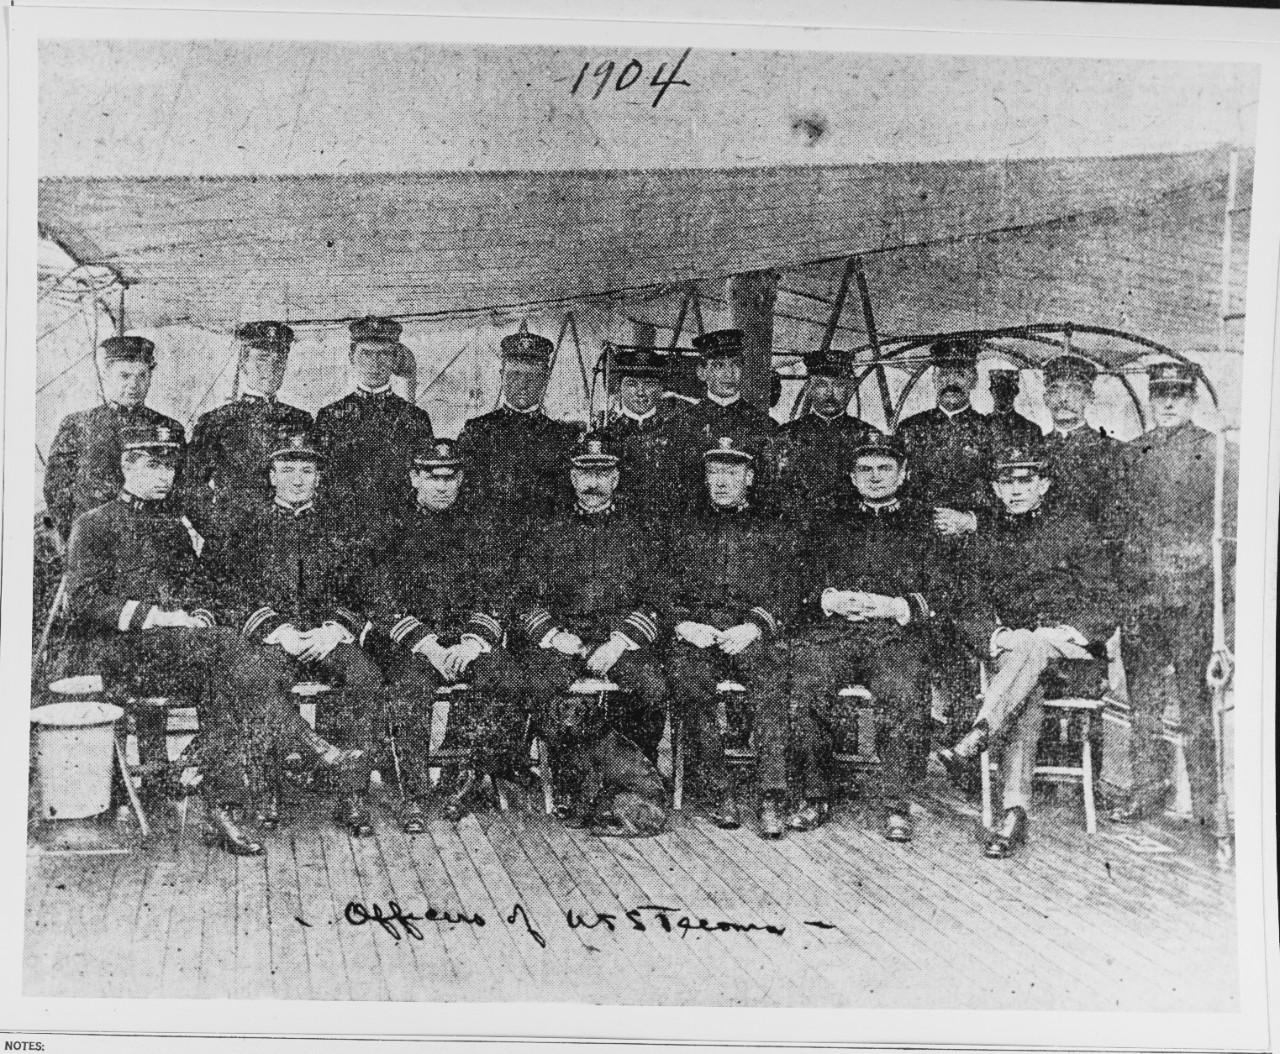 Officers of USS TECOMA, 1904